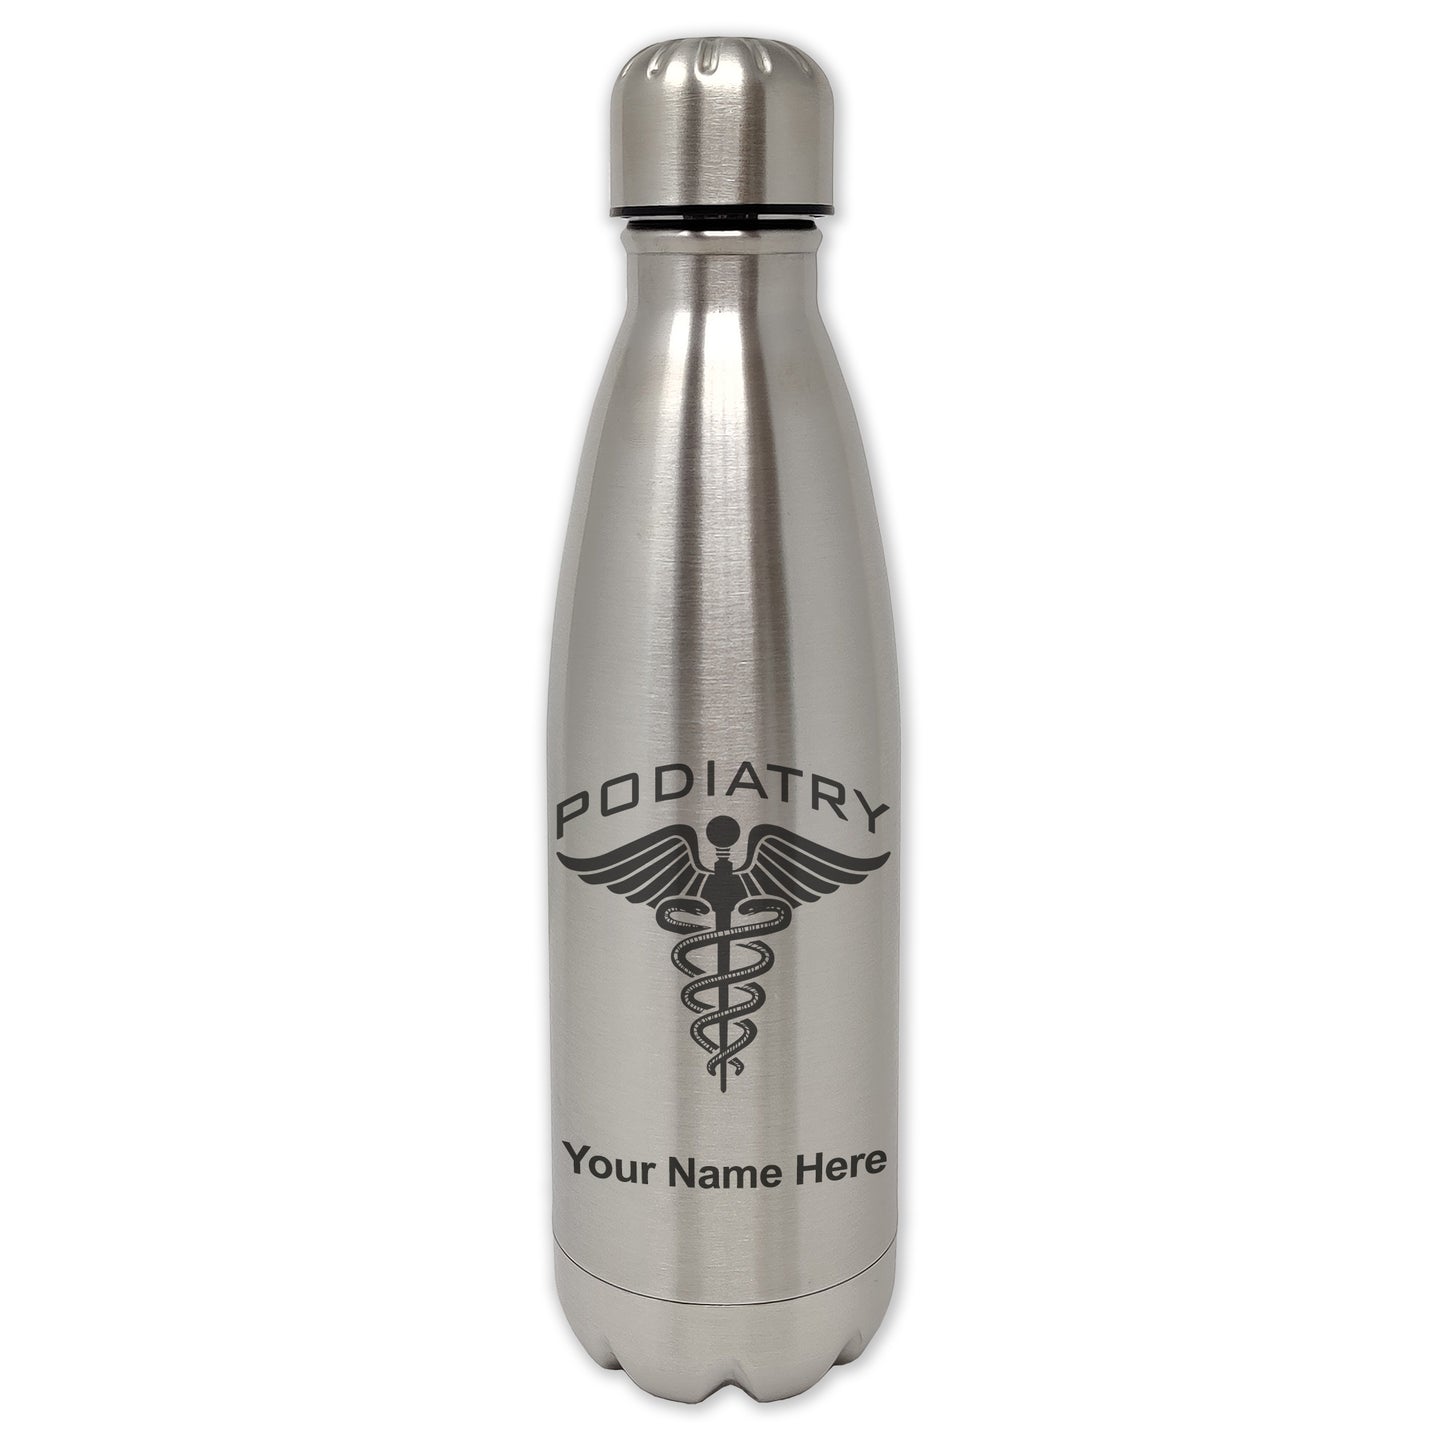 LaserGram Single Wall Water Bottle, Podiatry, Personalized Engraving Included